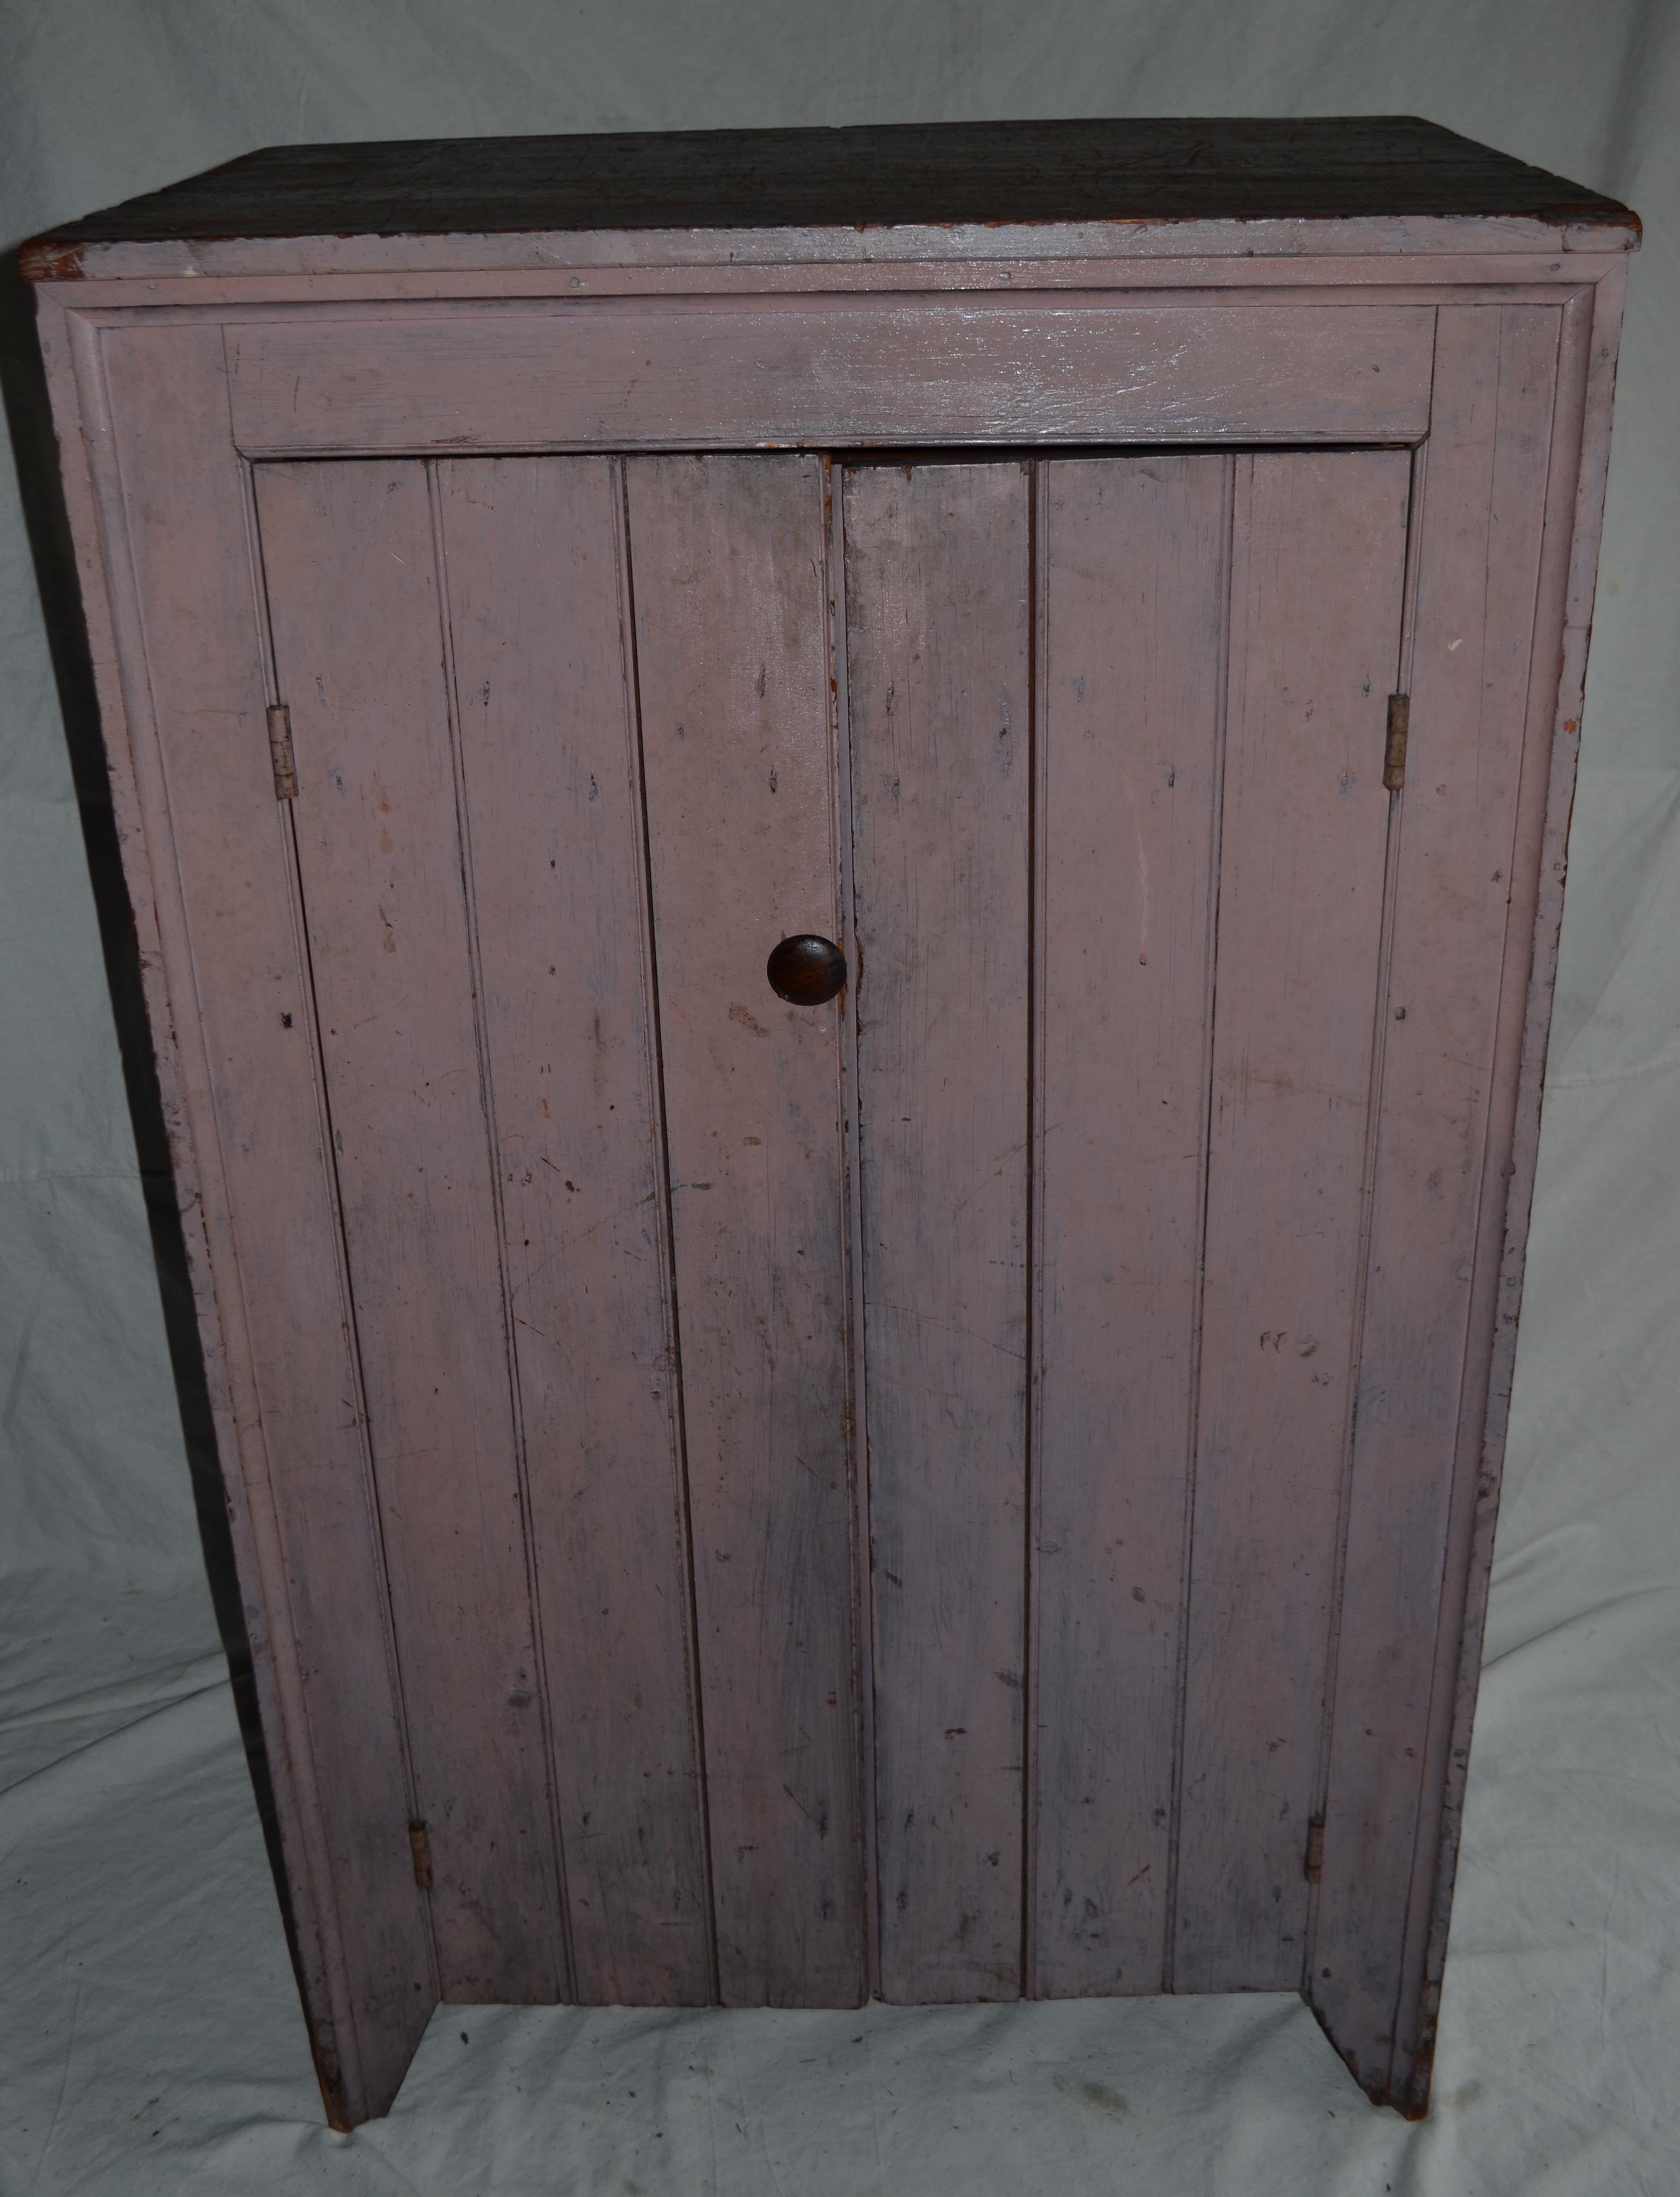 Pine Early 1800s Cupboard for Parlor, Kitchen, Pantry with Lockbox Inside